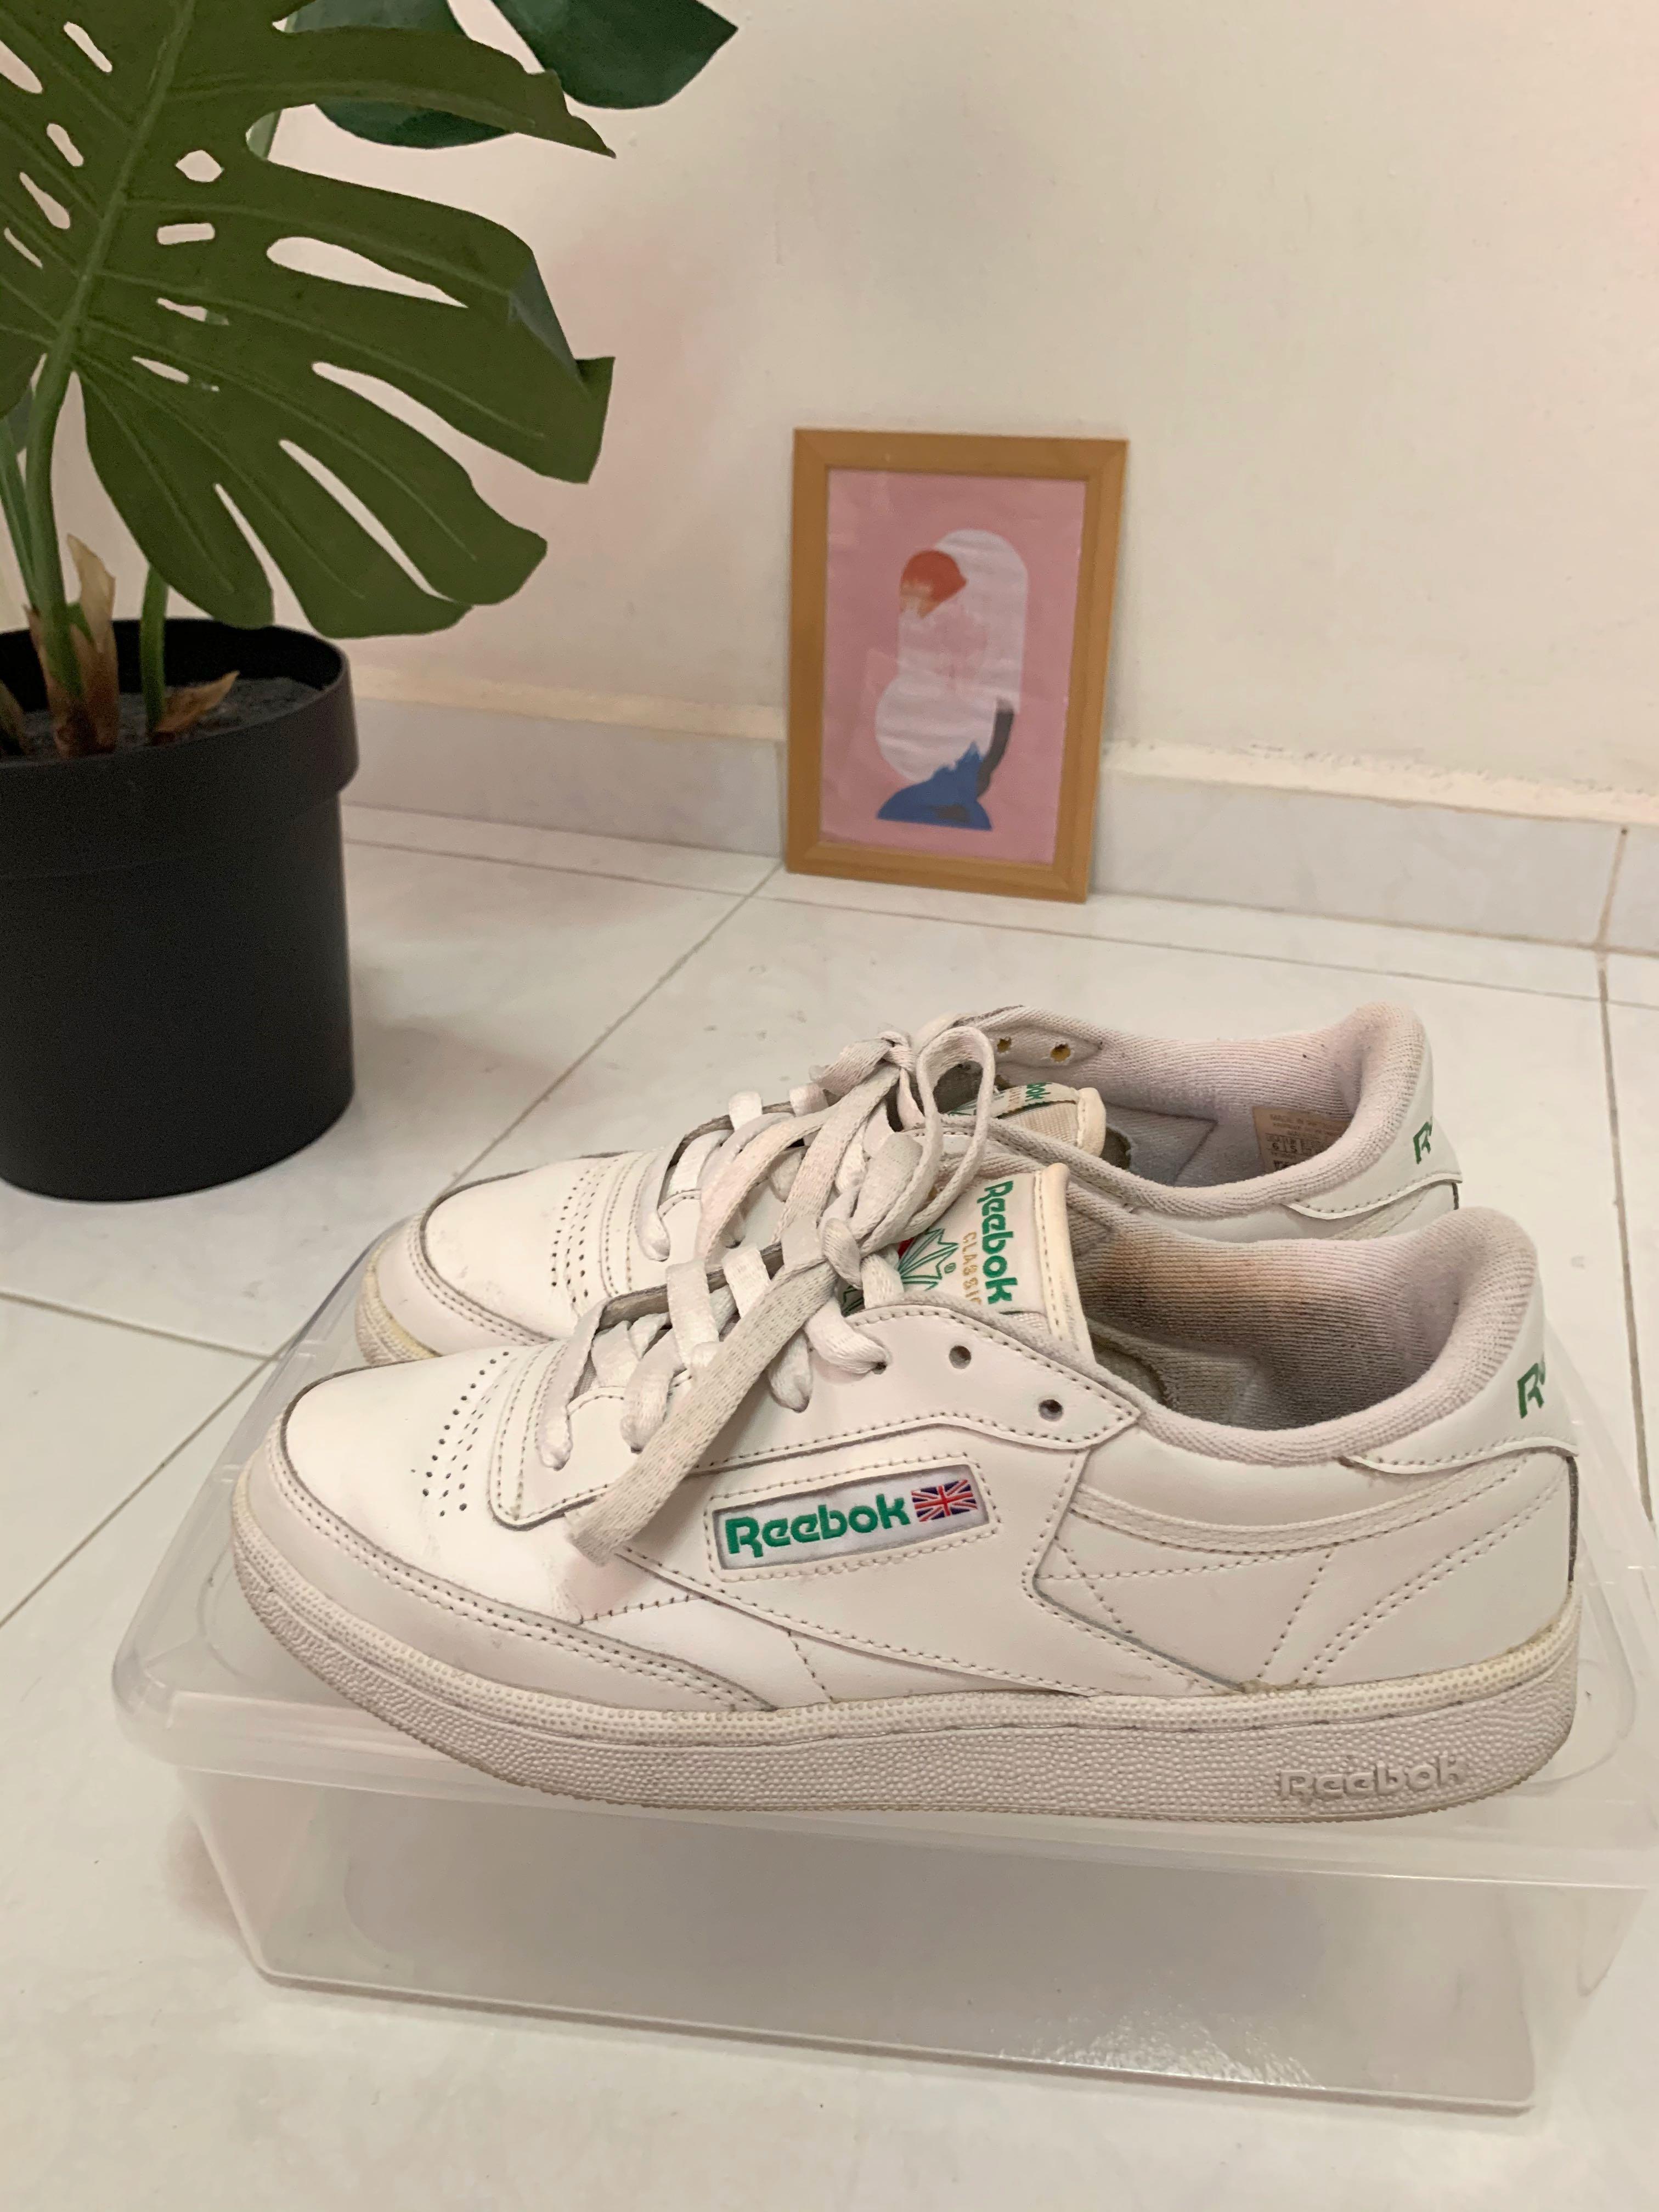 Reebok Club C 85 Trainers in white and 